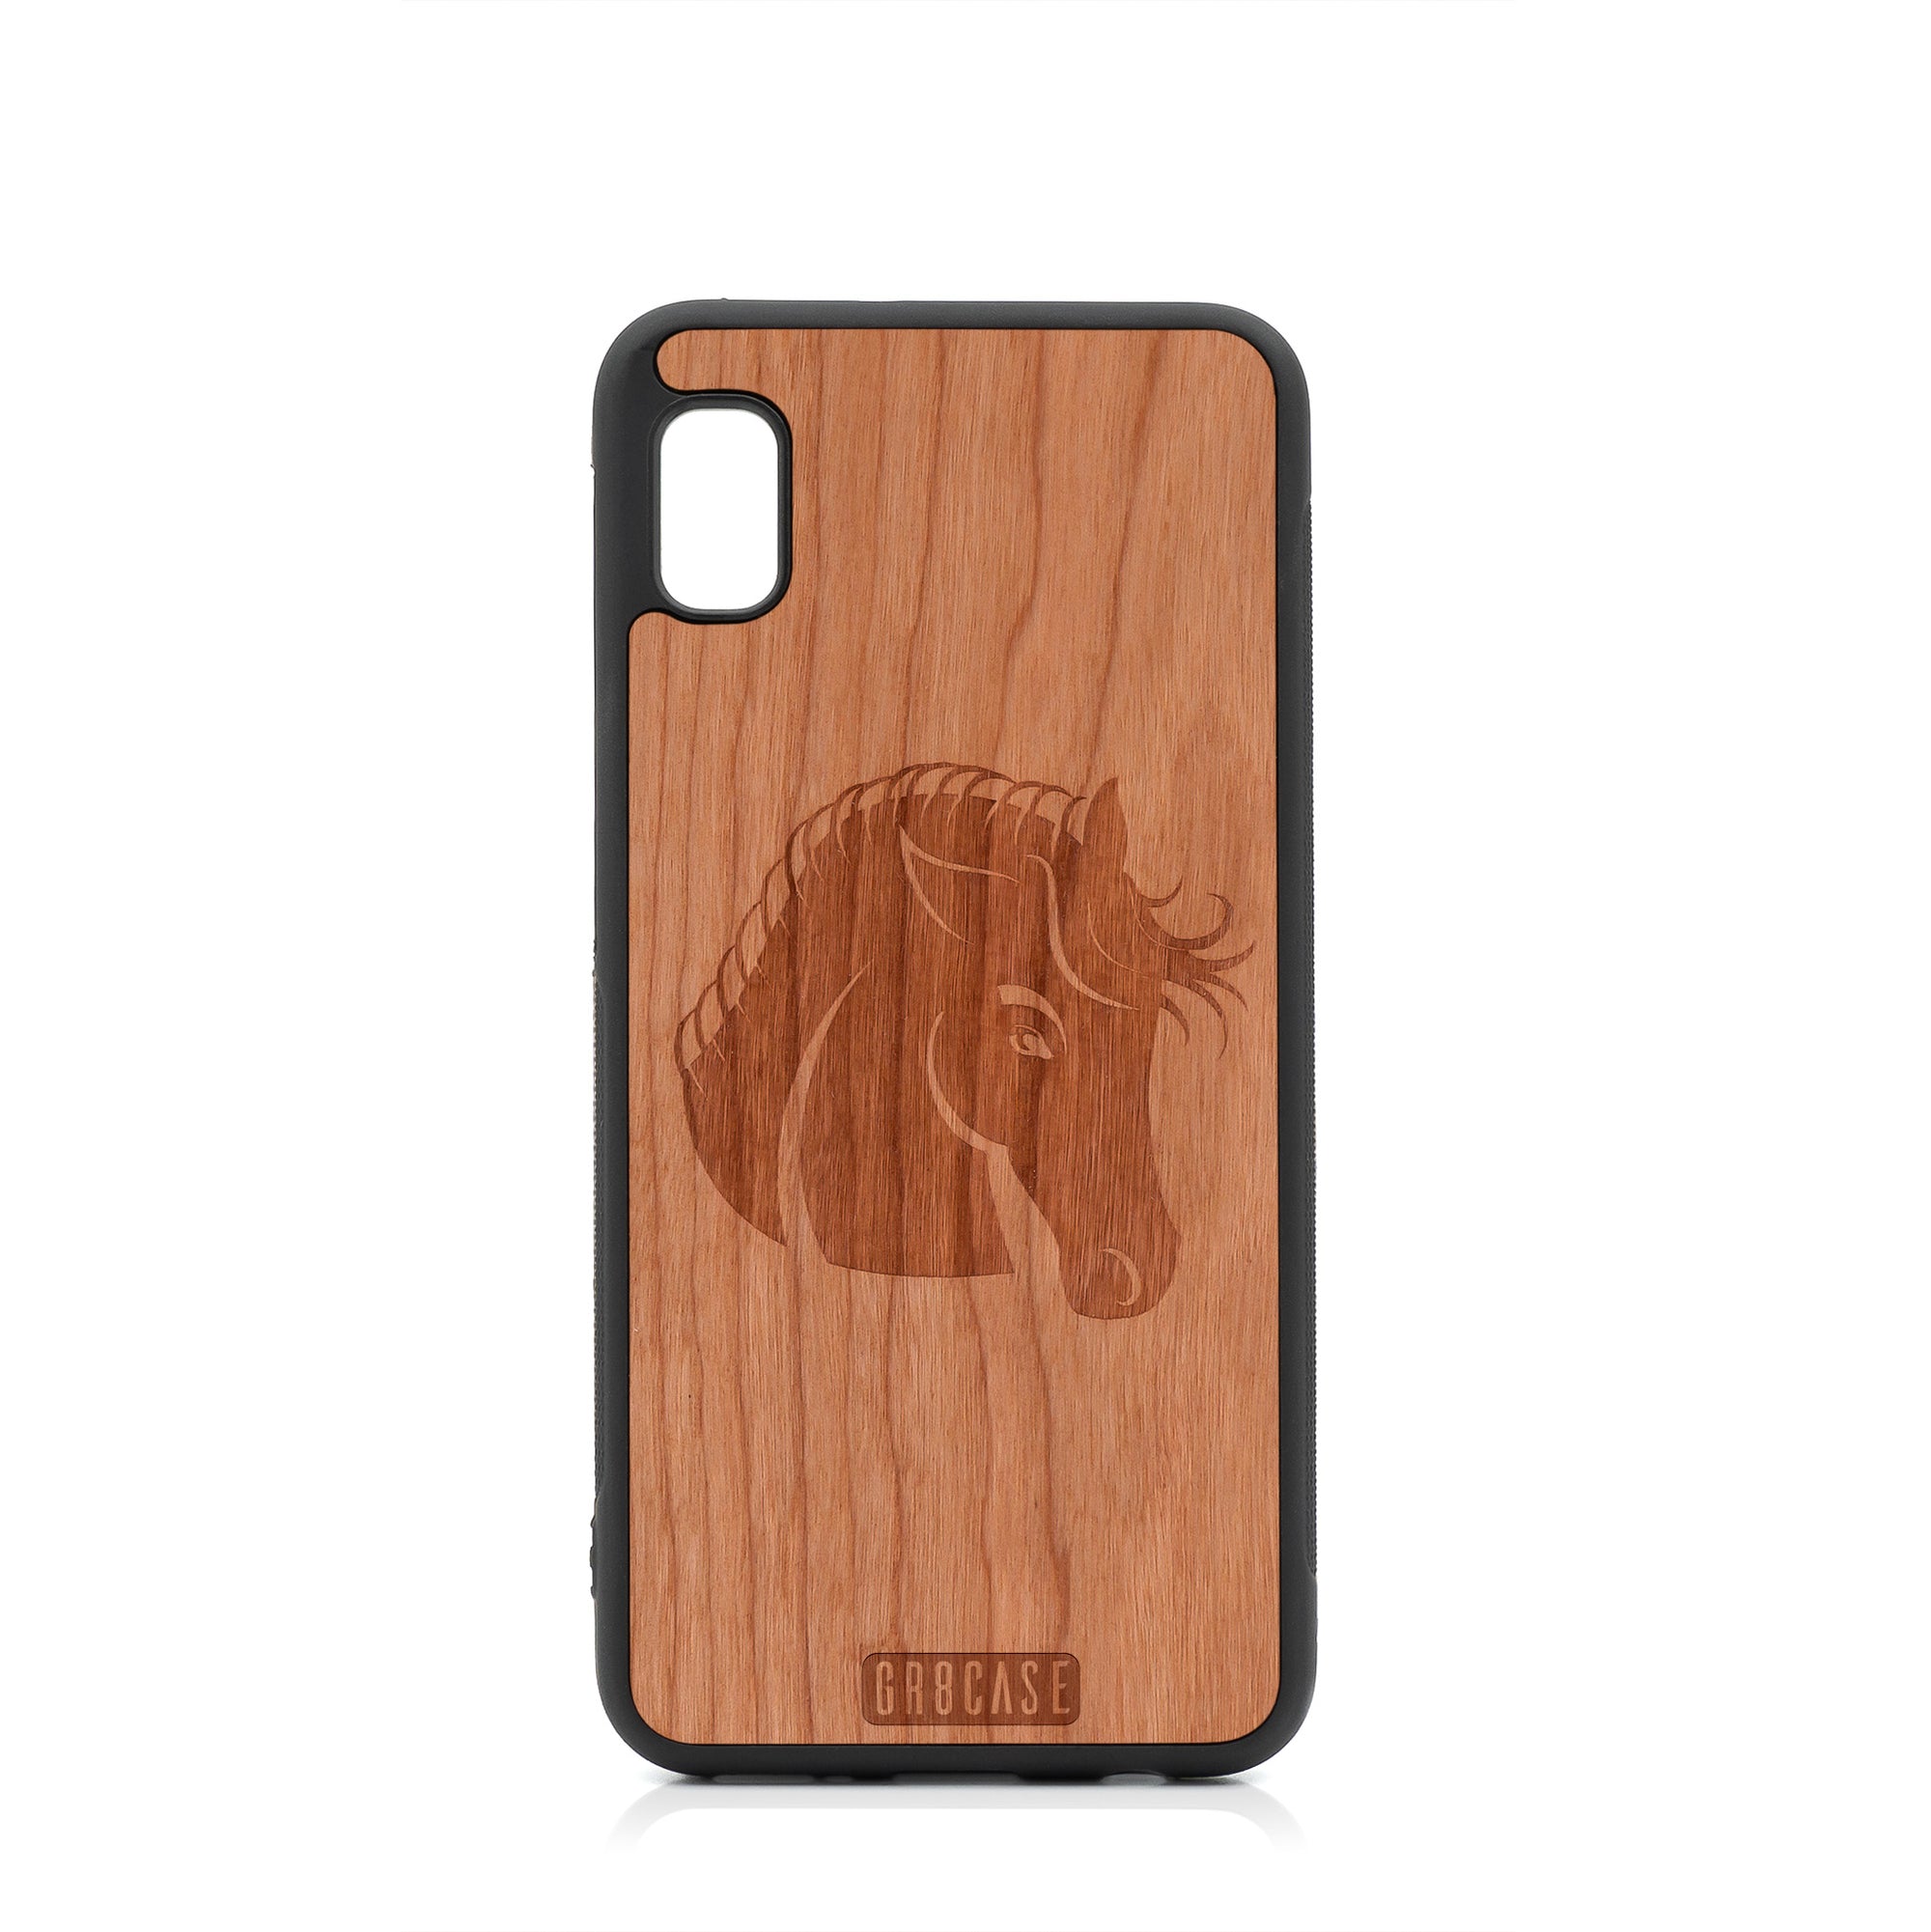 Horse Design Wood Case For Samsung Galaxy A10E by GR8CASE